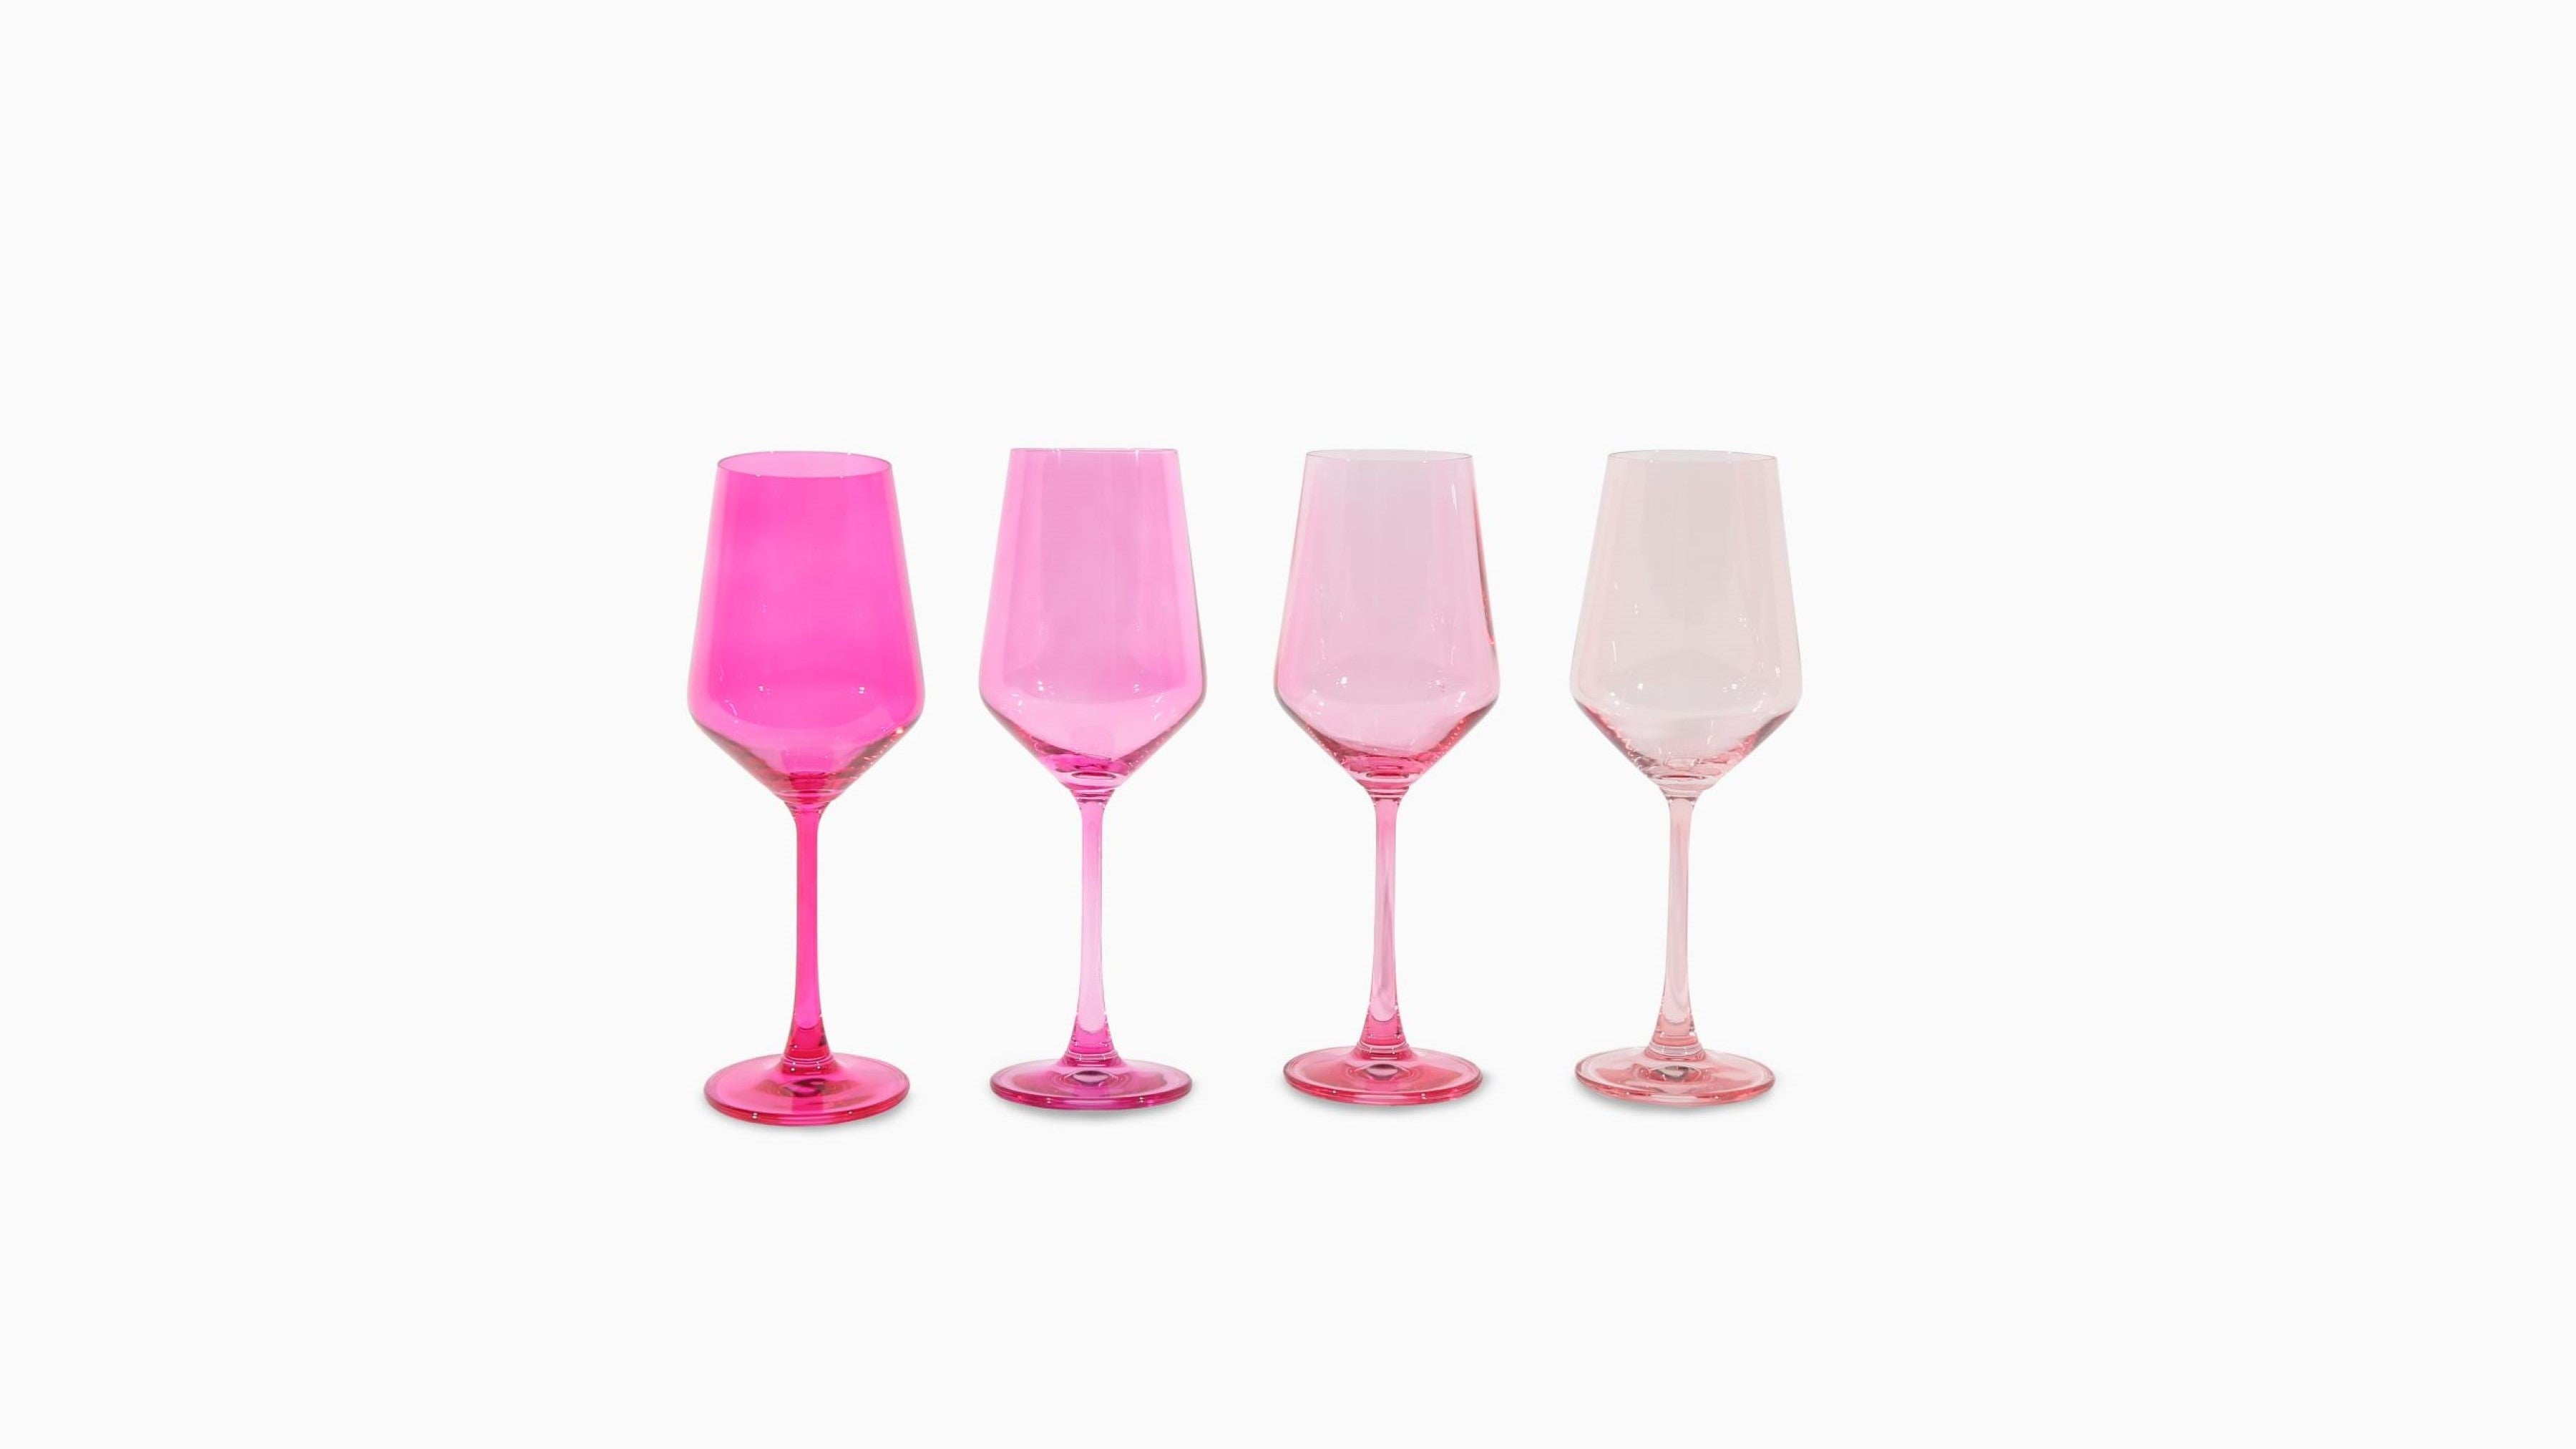 Hot Hot Pink Colored Wine Glass Set of 4 - Shop Now – glasshauseco